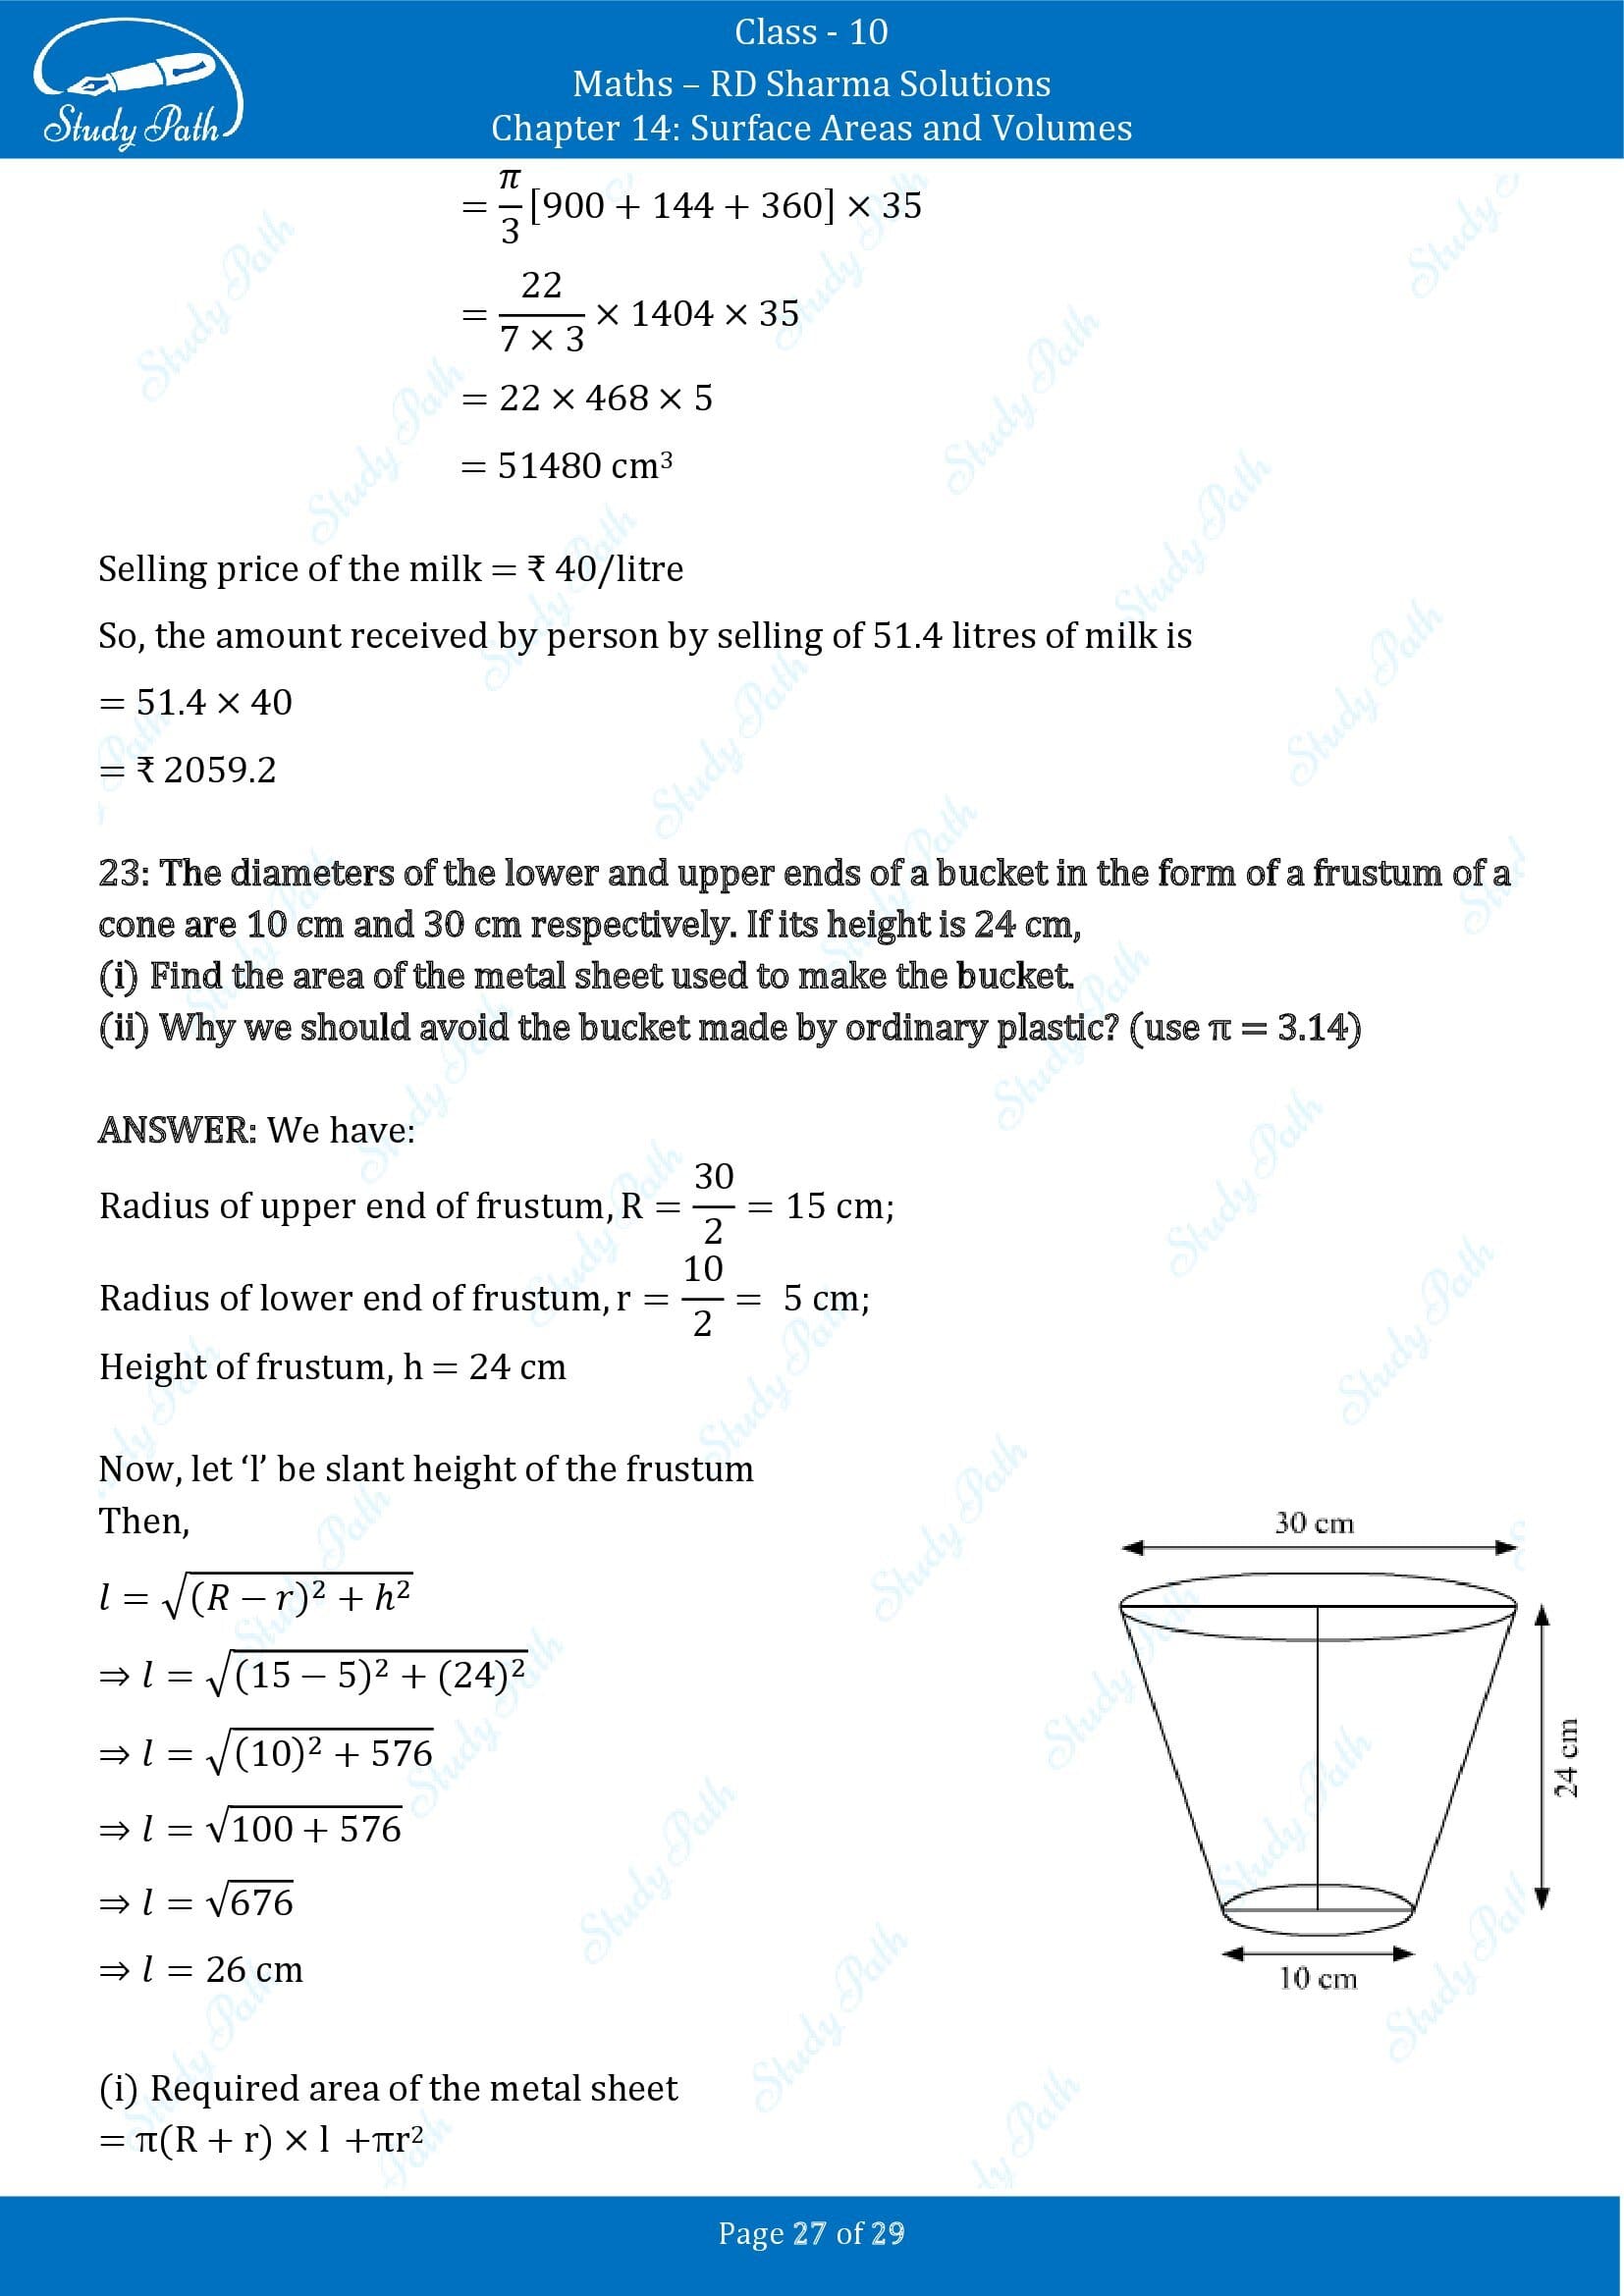 RD Sharma Solutions Class 10 Chapter 14 Surface Areas and Volumes Exercise 14.3 00027